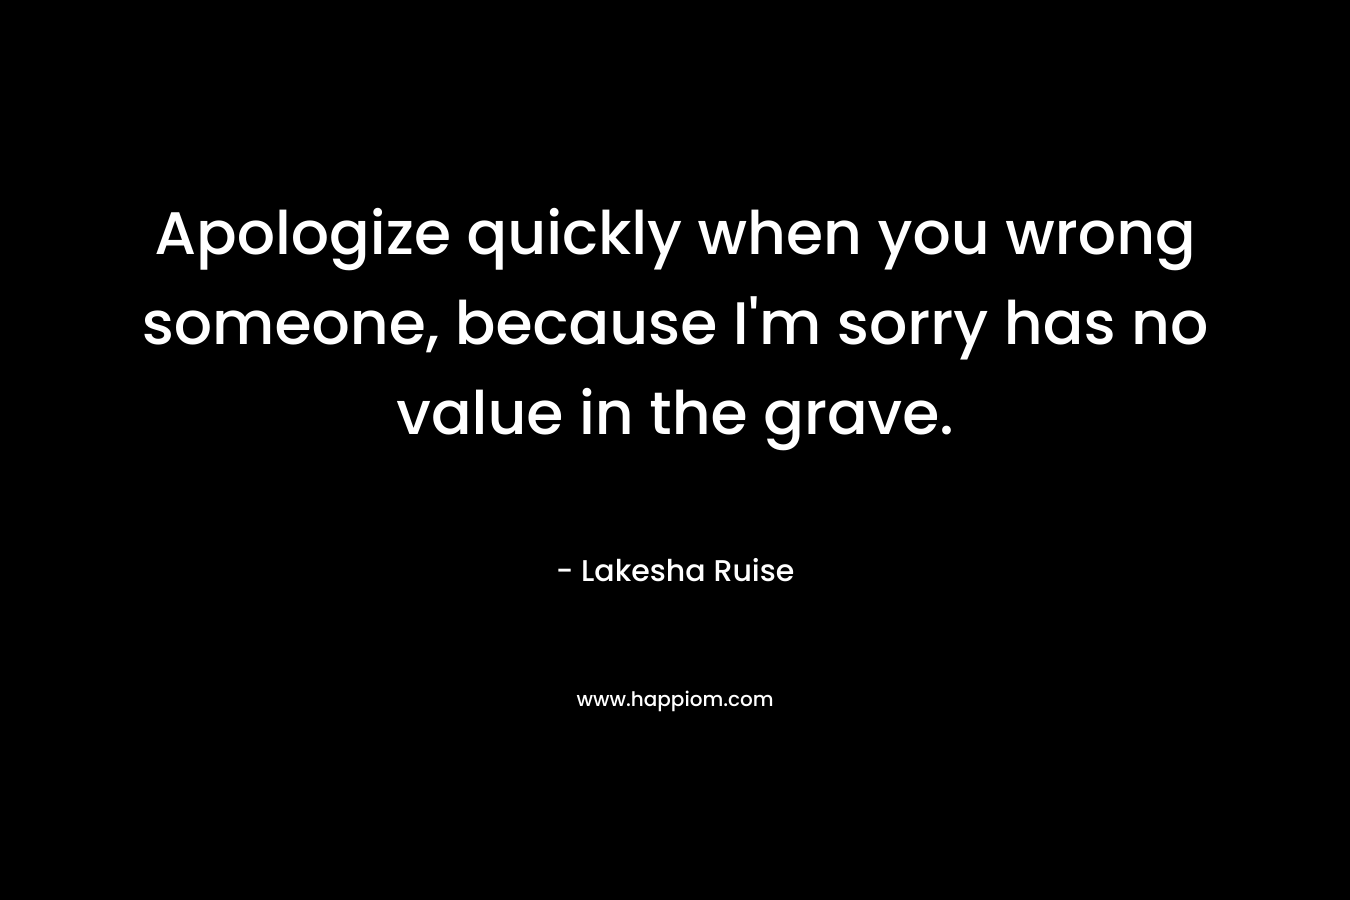 Apologize quickly when you wrong someone, because I'm sorry has no value in the grave.